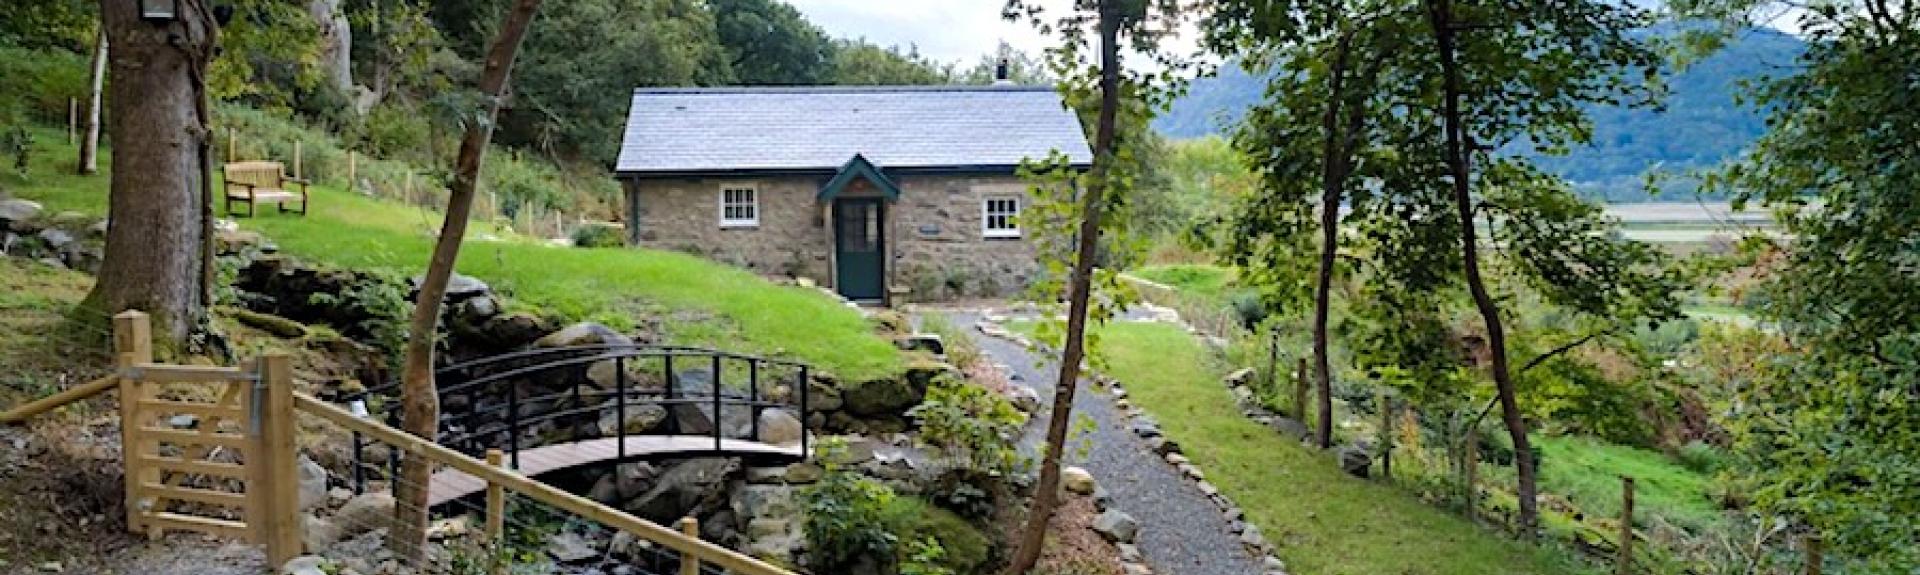 A single storey, stone cottage overlooks a garden with a small stream trickling under a bridge in the foreground.